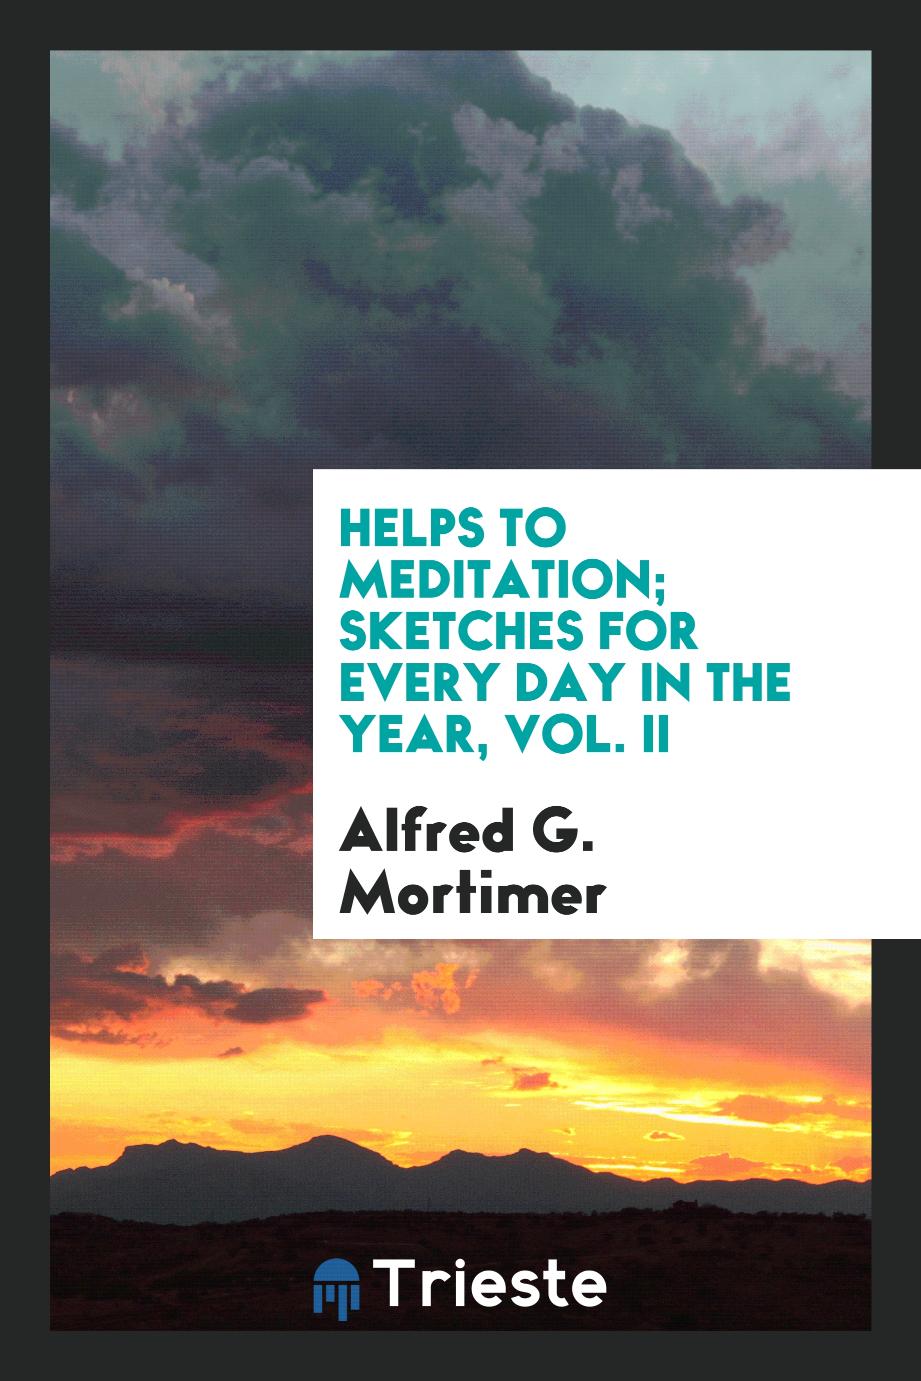 Helps to meditation; sketches for every day in the year, Vol. II